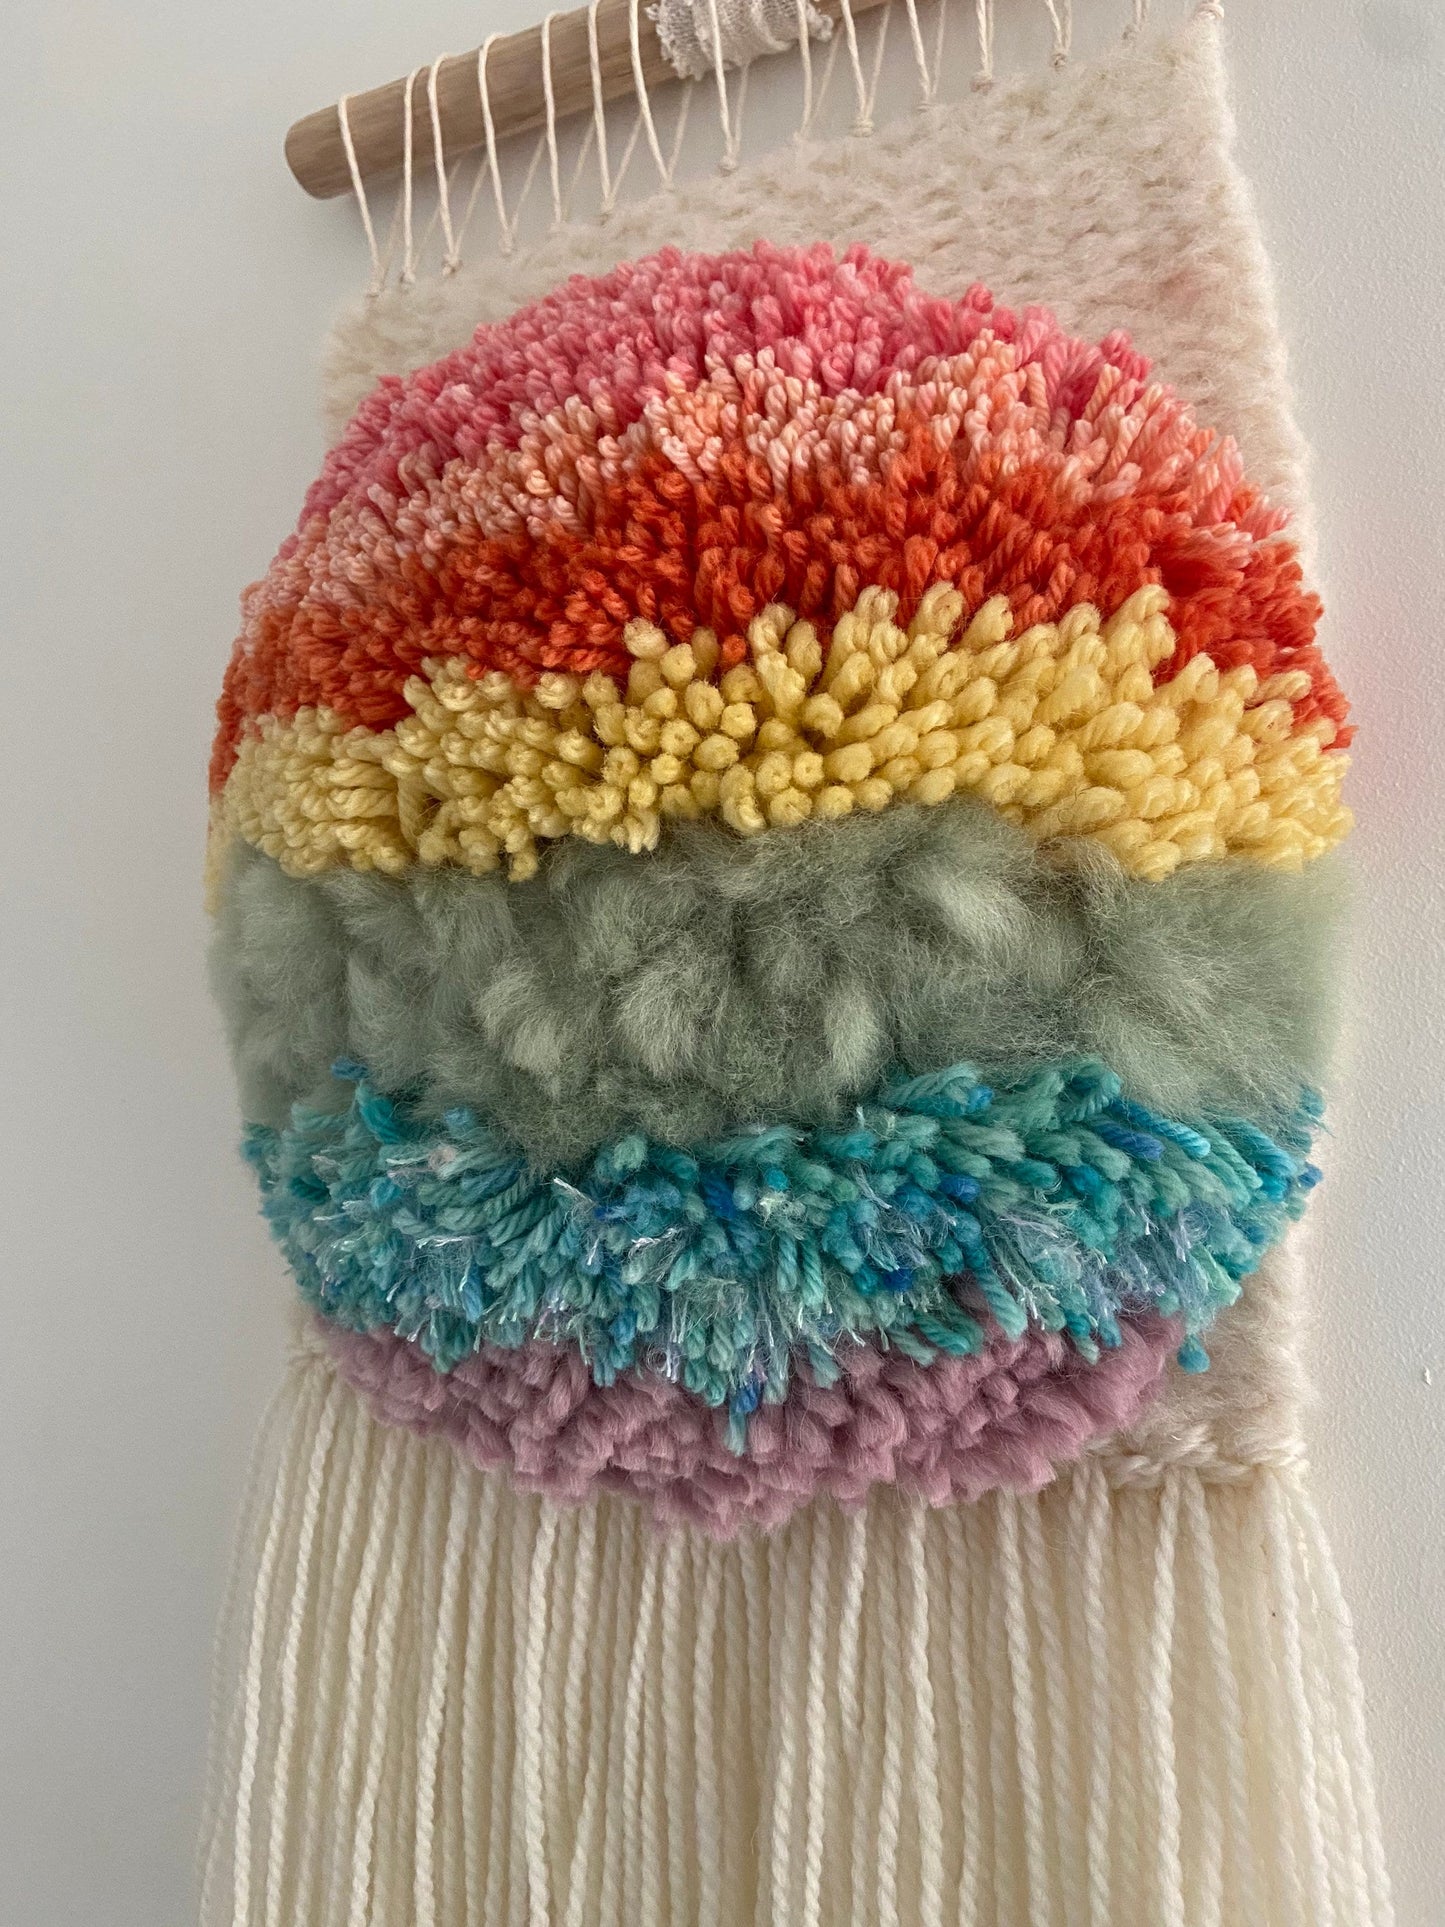 RAINBOW PUFF - Woven and Tufted Wall Hanging